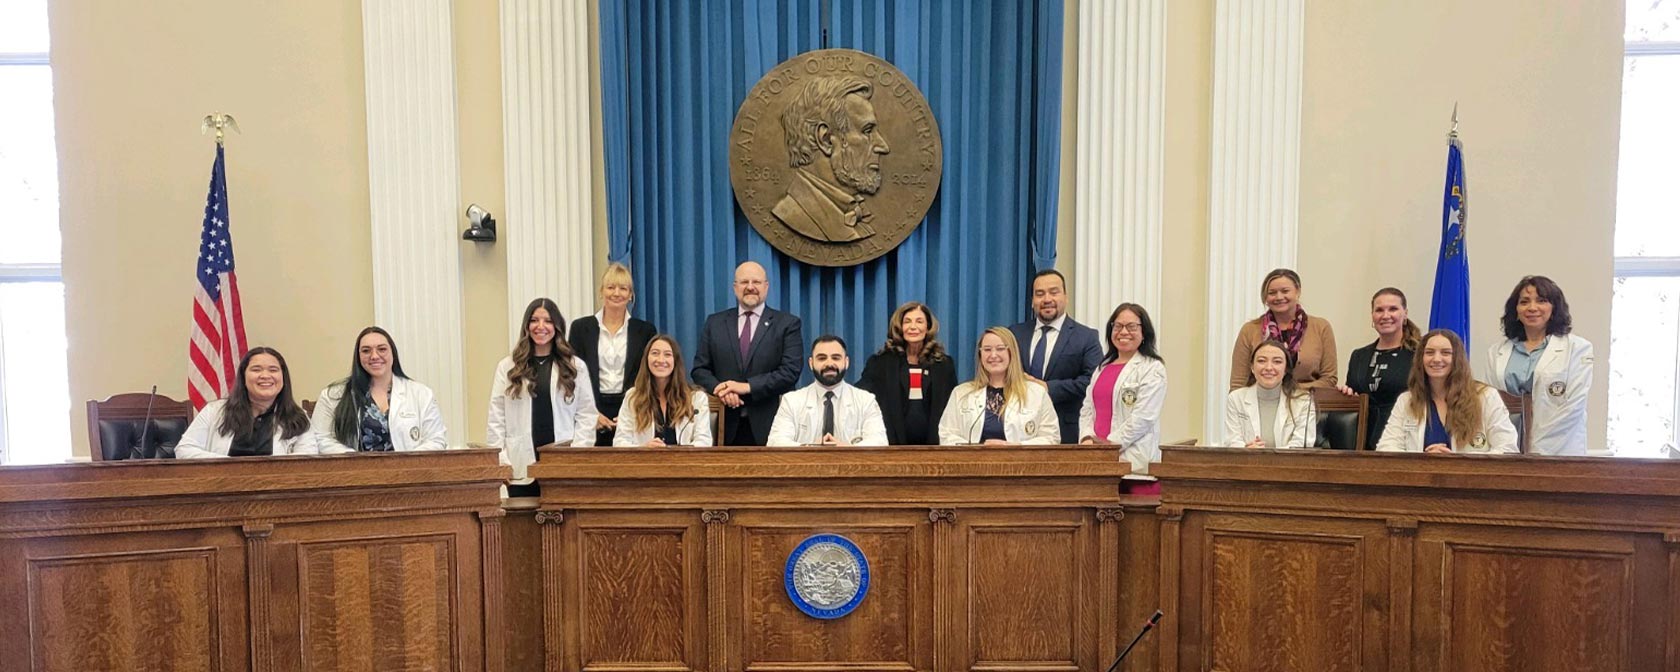 Touro students and representatives gather for a photo inside the Assembly Room at the Nevada State Capitol.